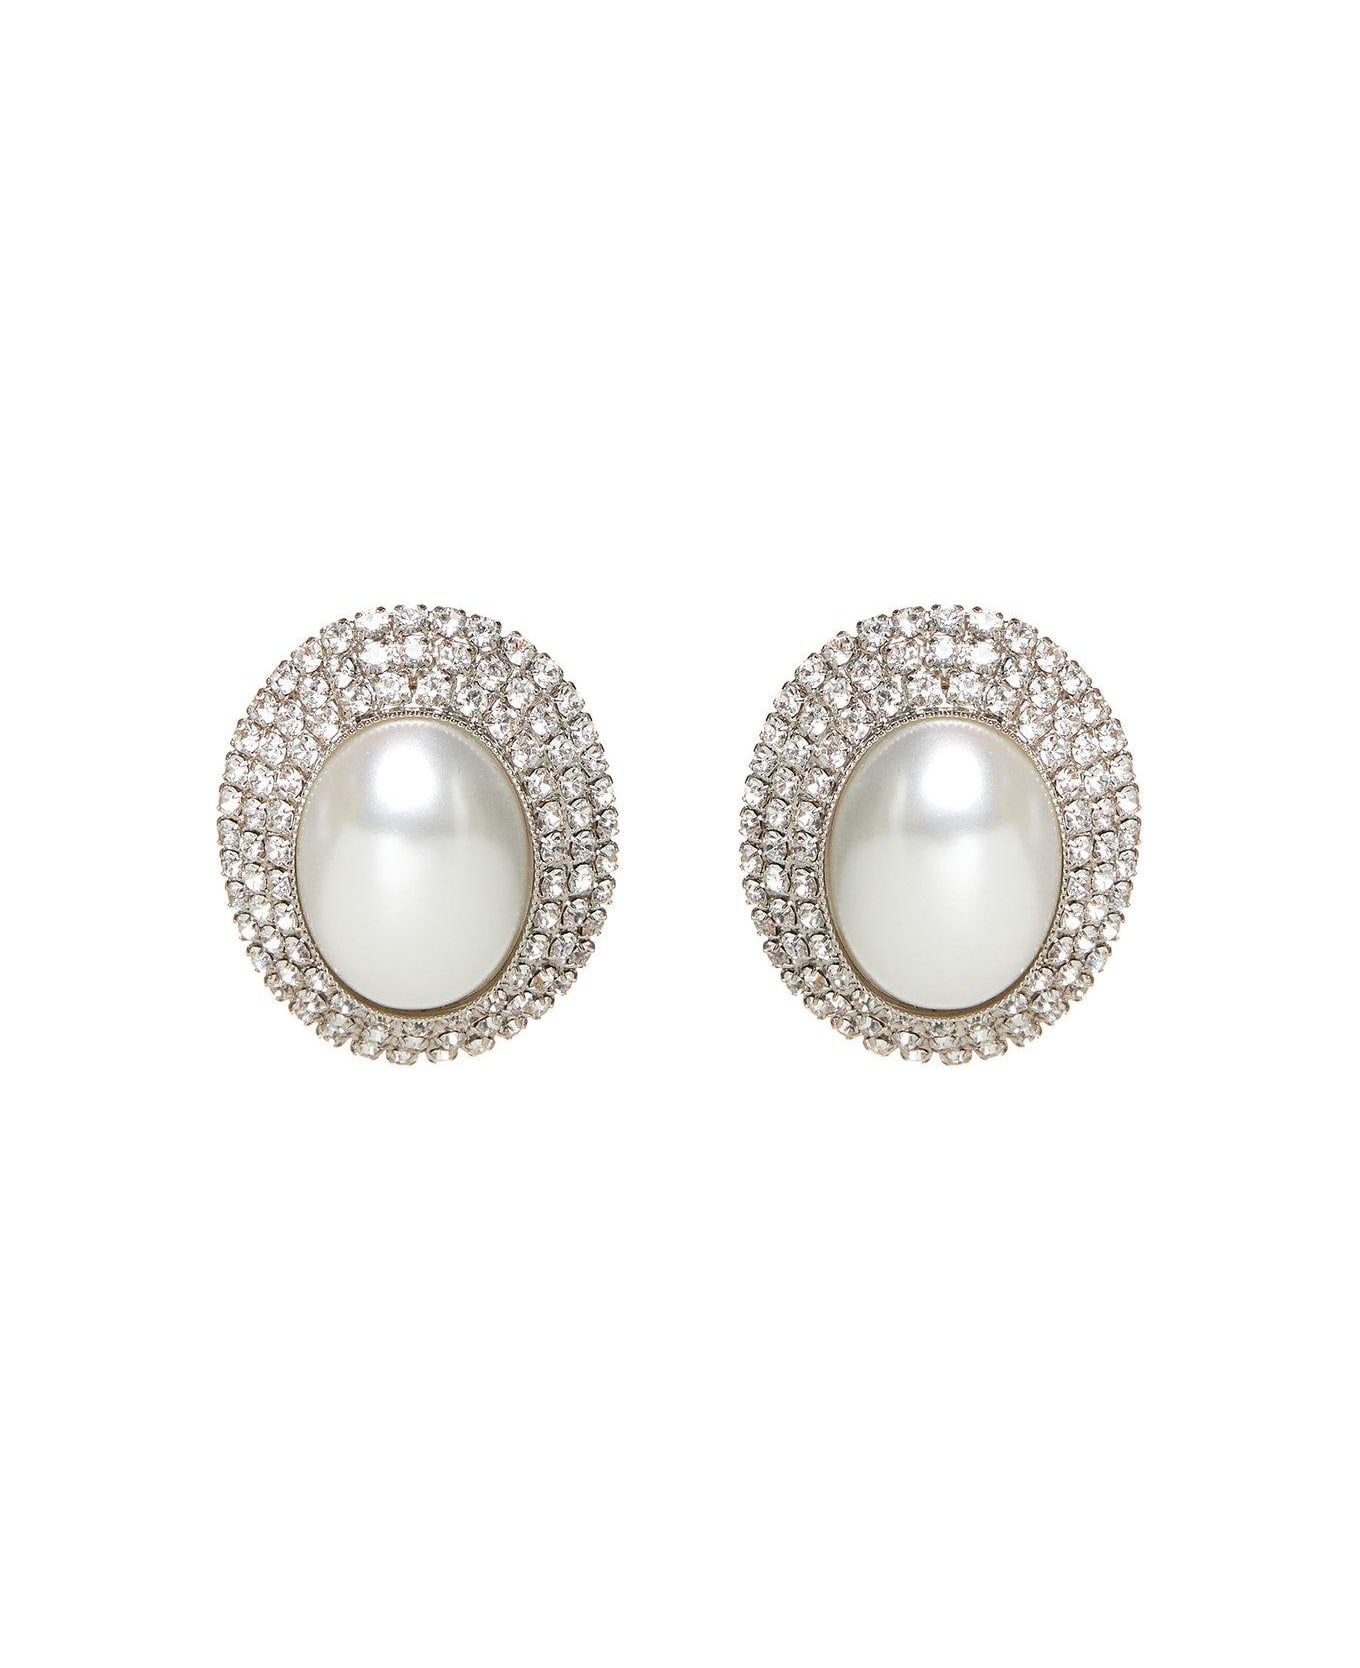 Alessandra Rich Embellished Clip-on Earrings - Silver